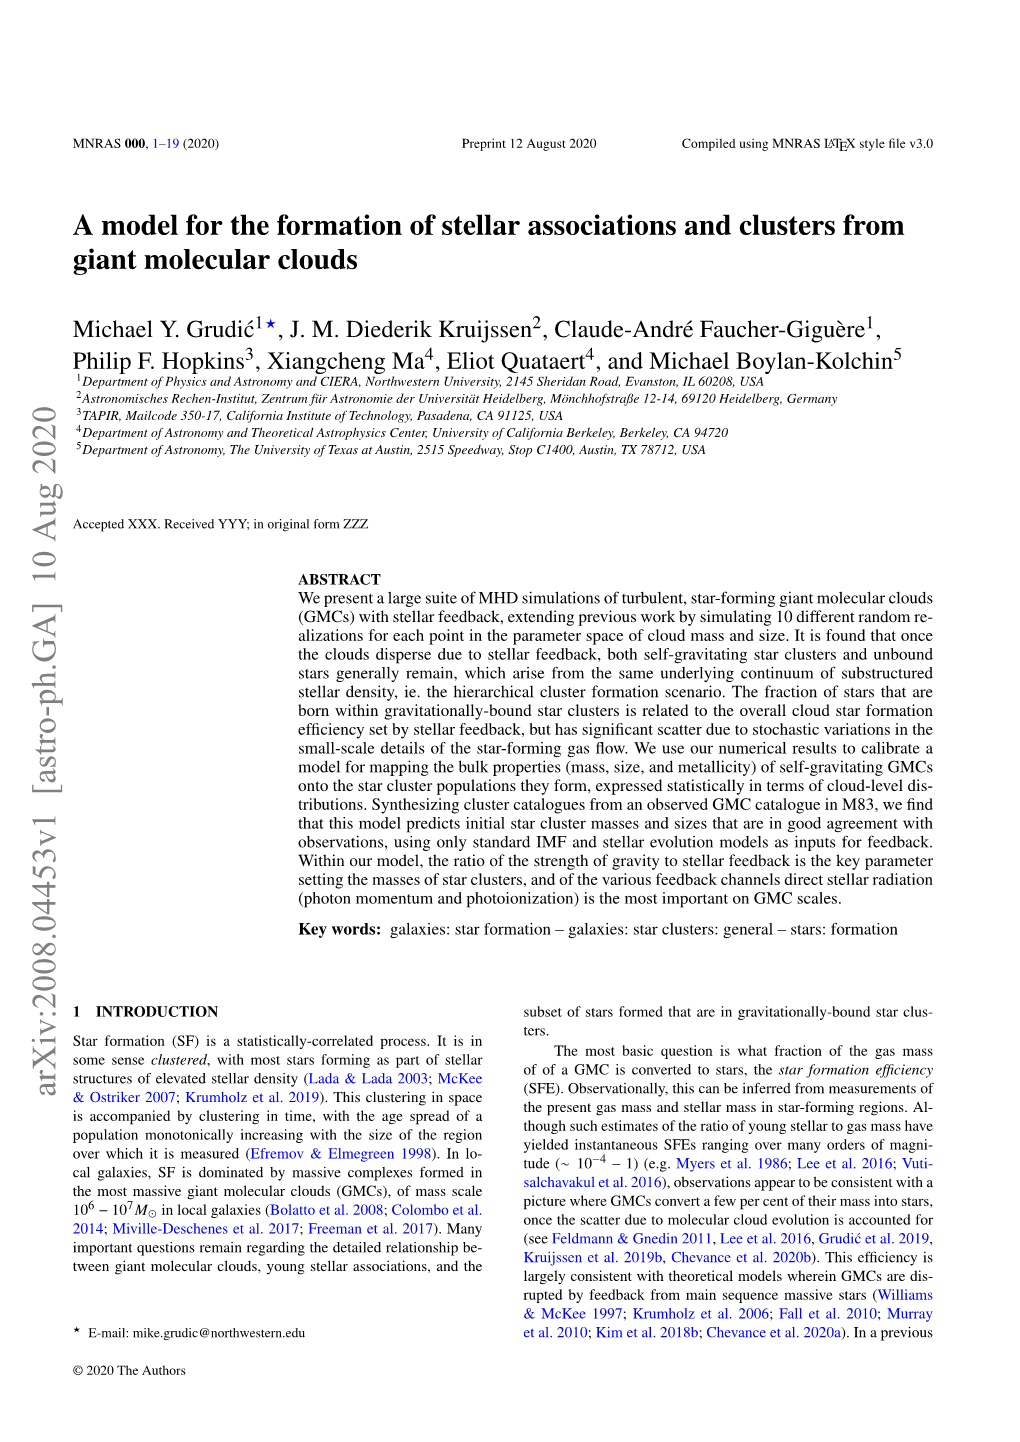 A Model for the Formation of Stellar Associations and Clusters from Giant Molecular Clouds